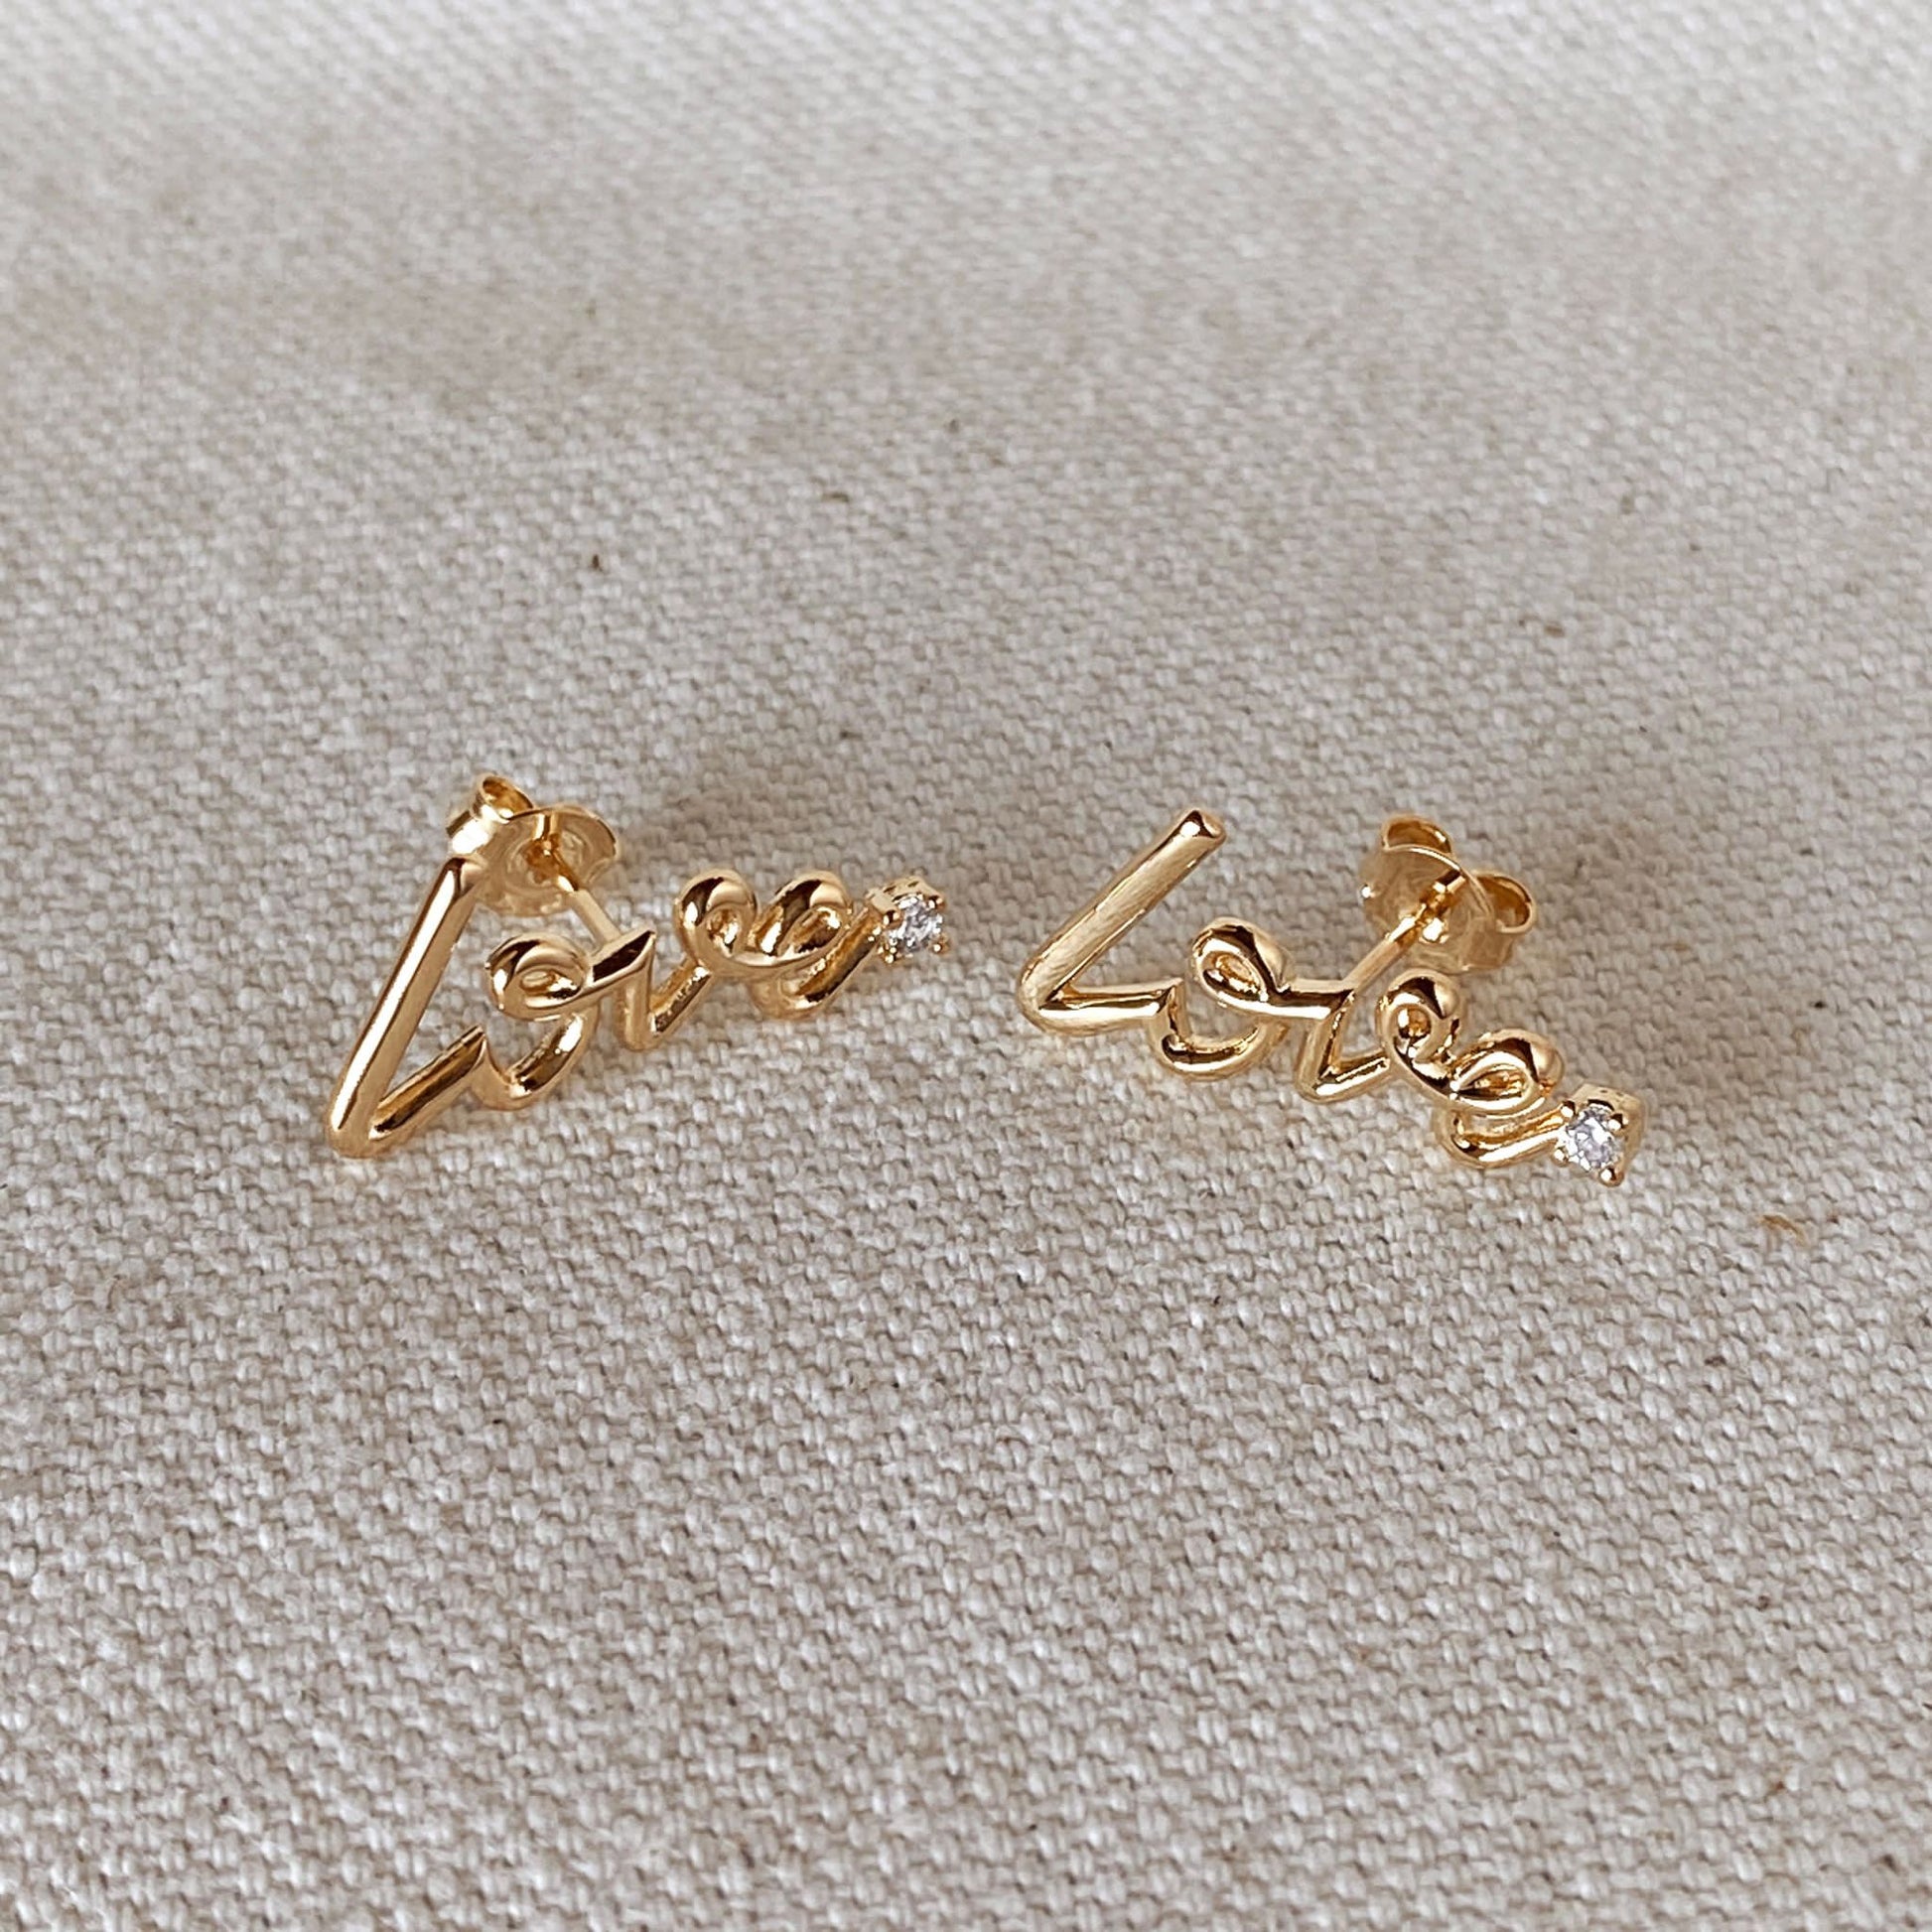 GoldFi 18k Gold Filled Cursive Love Stud With Cubic Zirconia